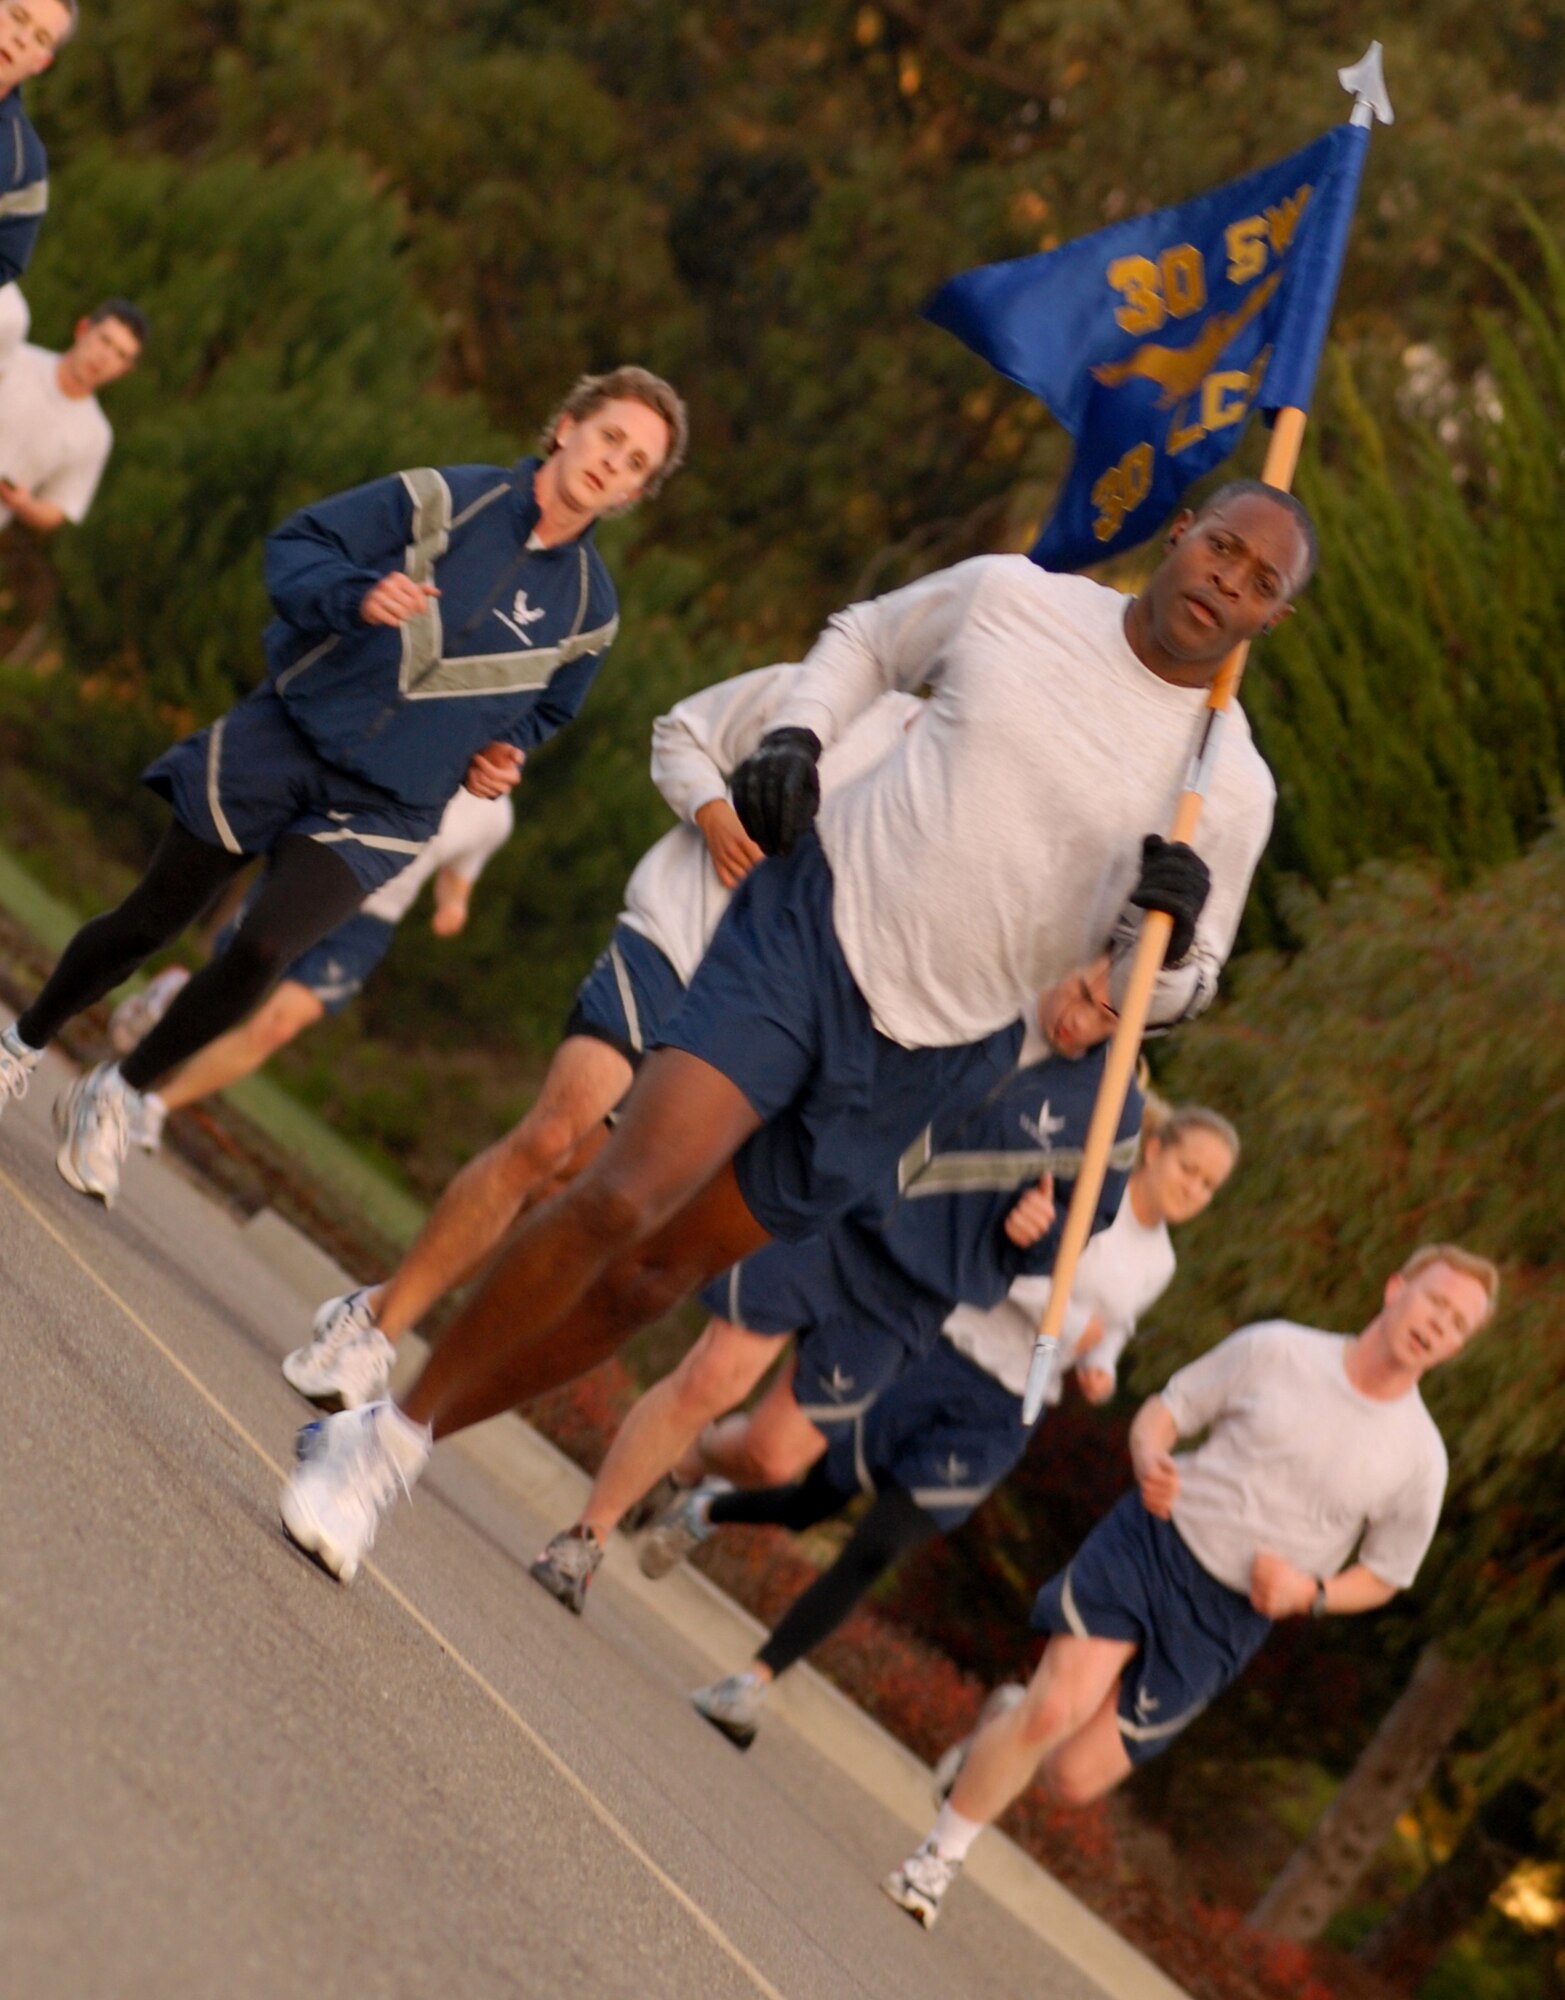 VANDENBERG AIR FORCE BASE, Calif. -- Leading members of the 30th Launch Group during the wing run, Col. Lavanson Coffey, the 30th LCG commander, carries the group's guidon Friday, Jan. 29, 2010, here. The 30th Space Wing Fit-to-Fight Run is held monthly in order to promote a more fit Air Force. (U.S. Air Force photo/Airman 1st Class Kerelin Molina)
